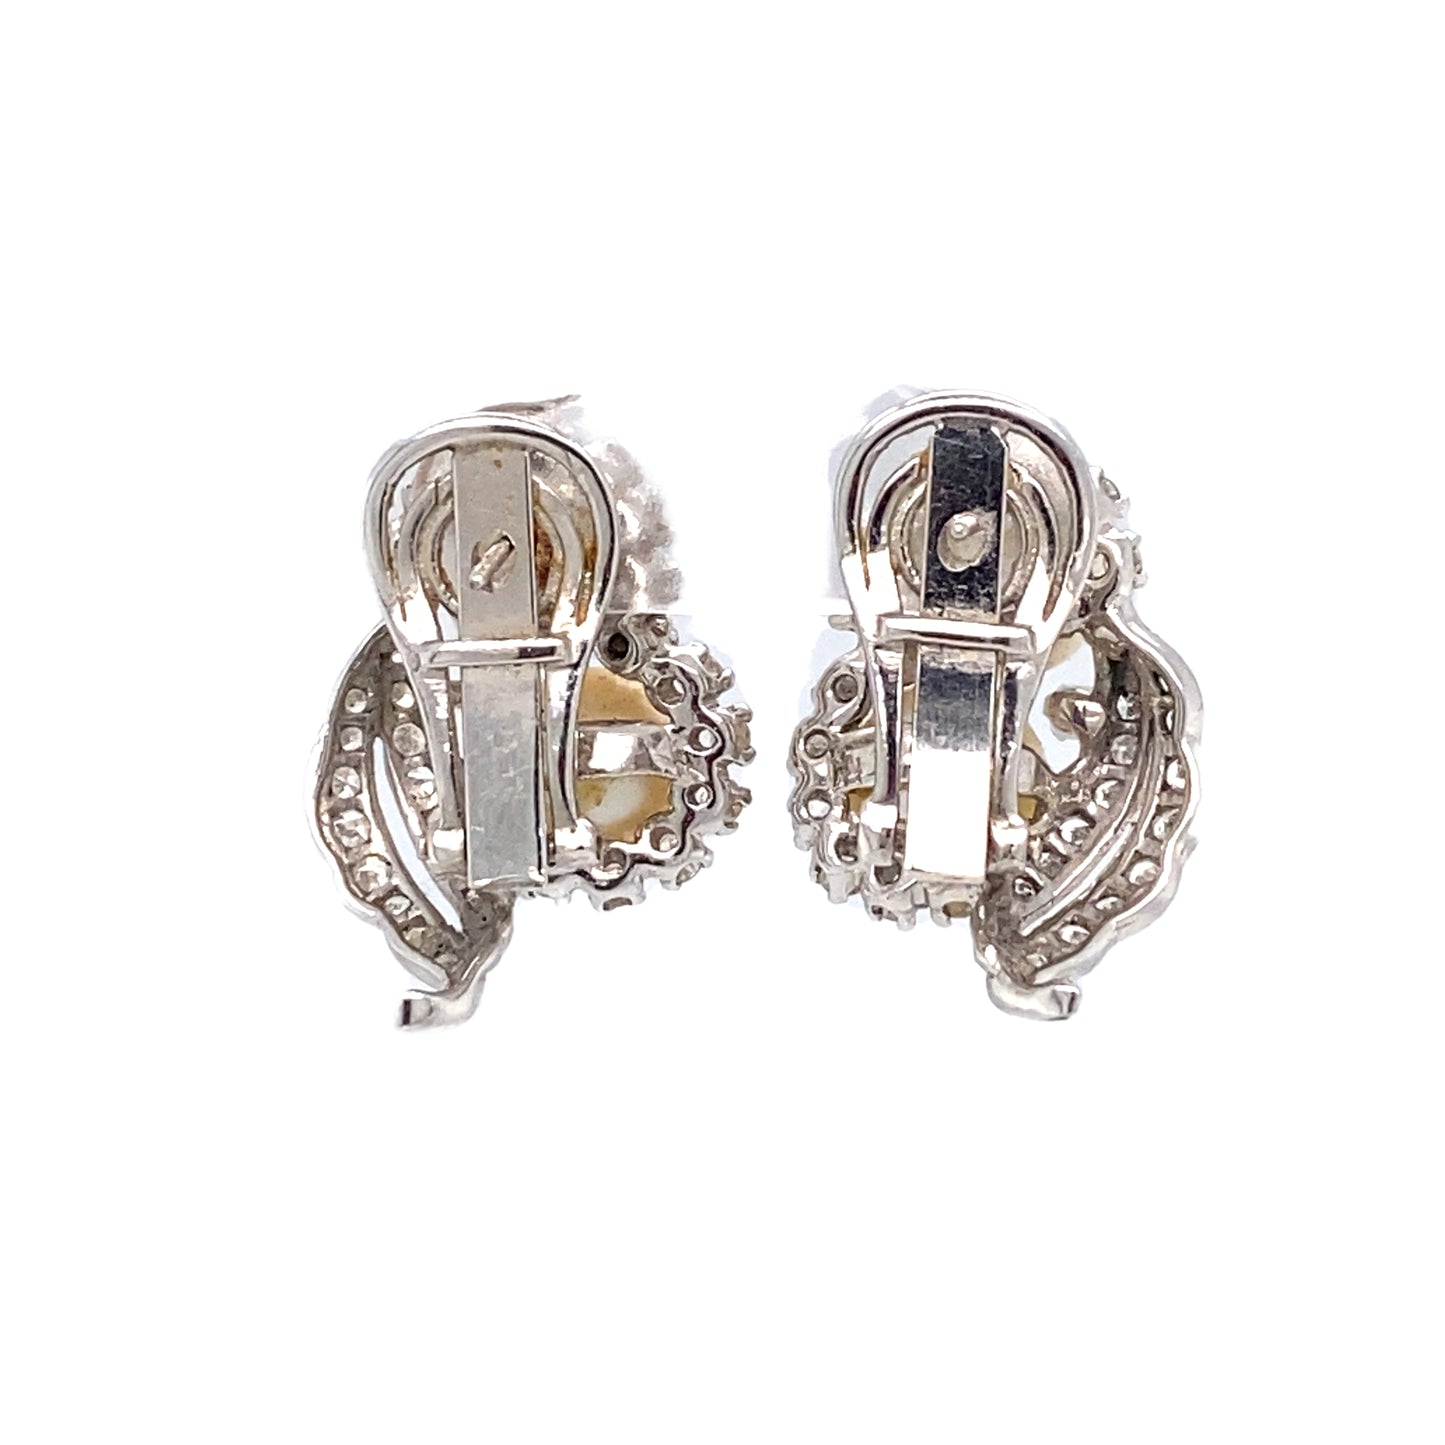 Circa 1920 1.0ct Diamond and Pearl Earrings in 14K White Gold